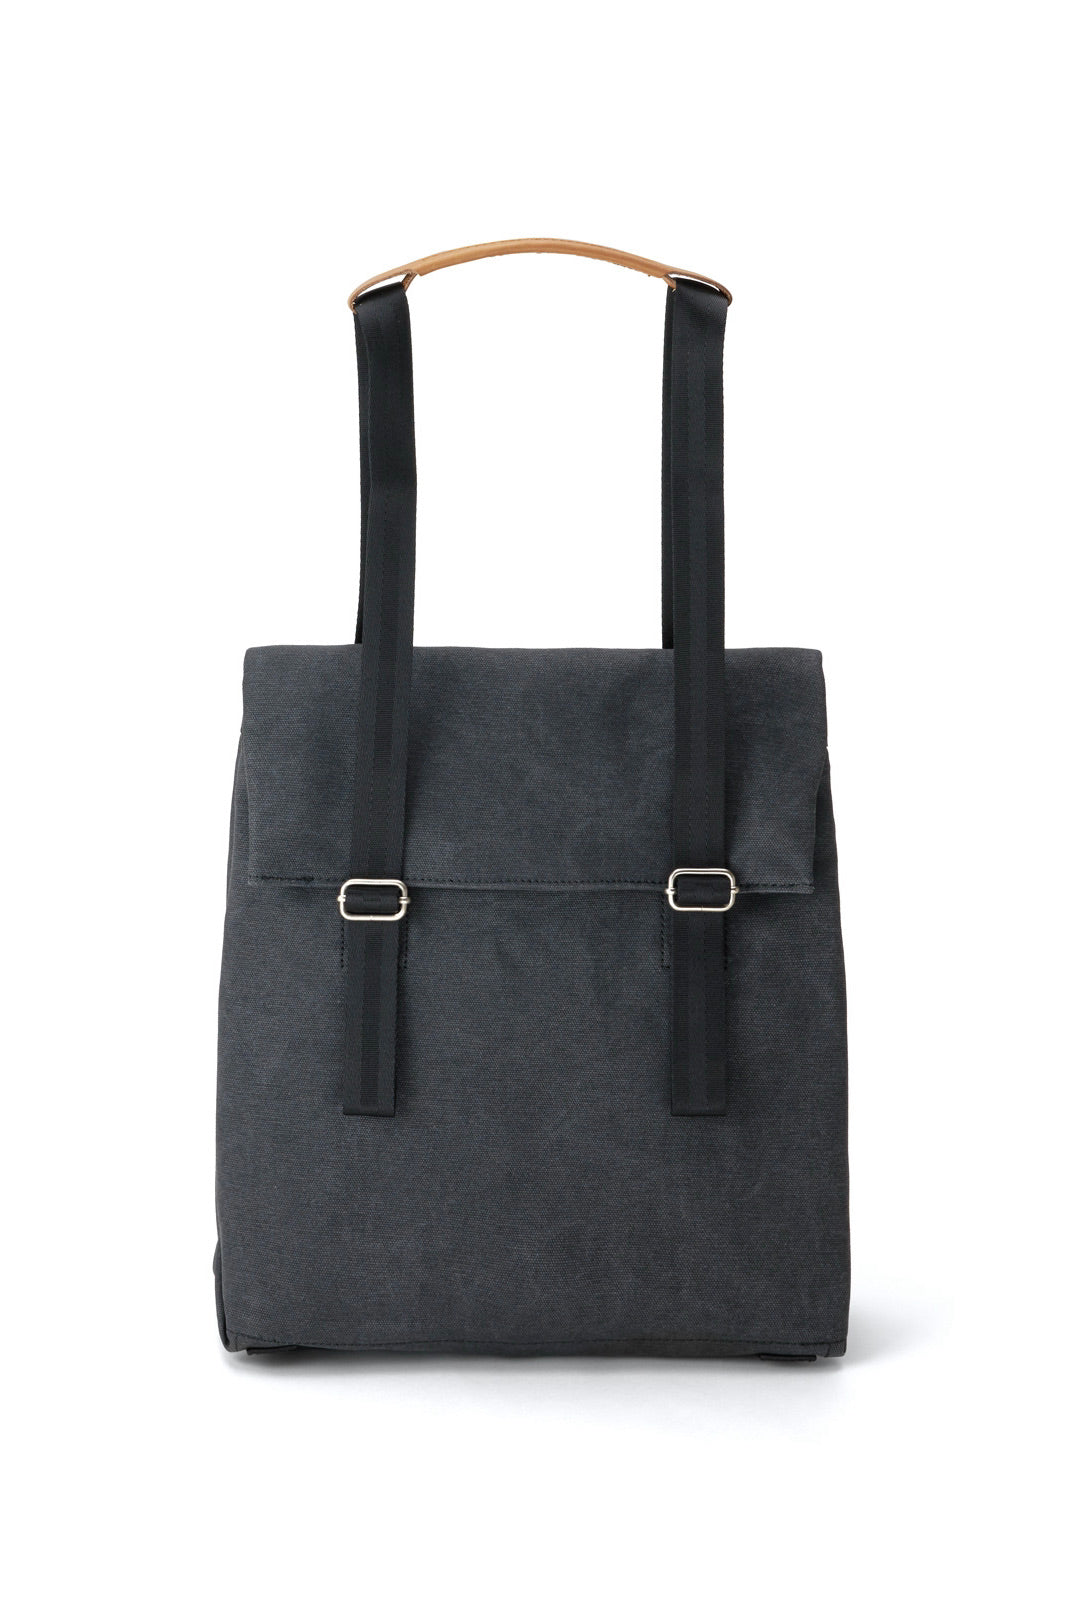 SMALL TOTE organic washed black